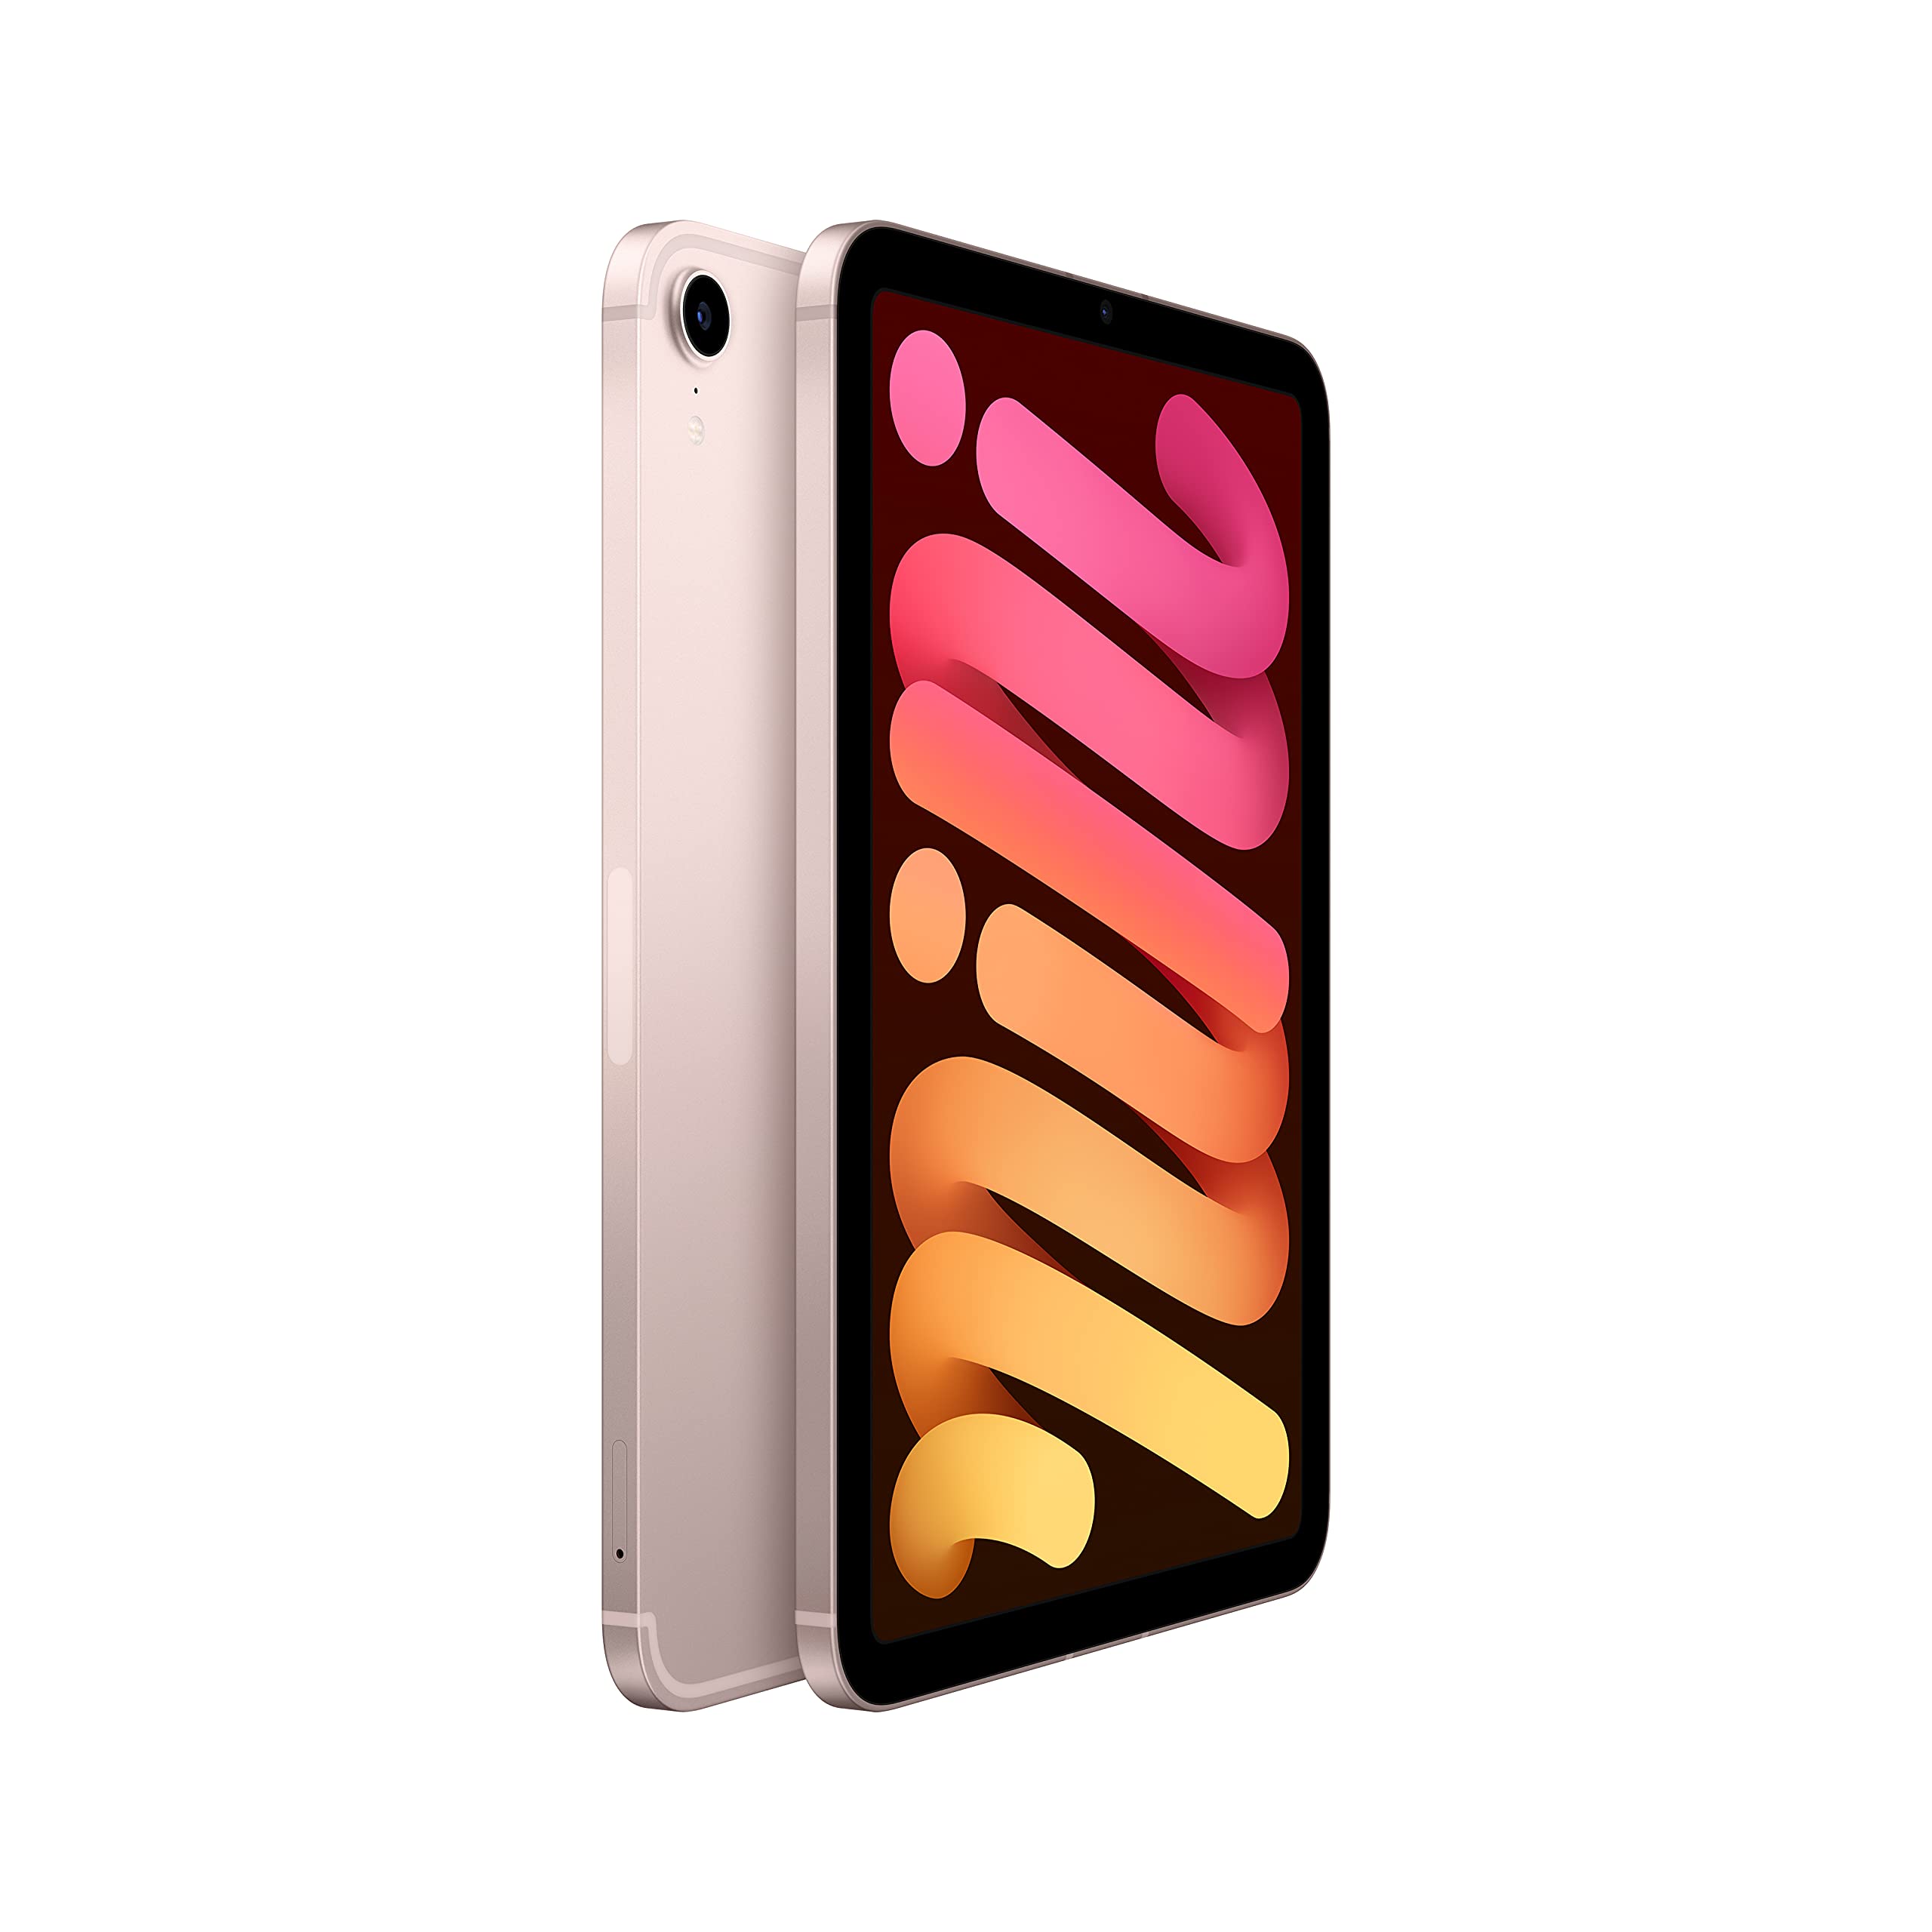 Apple iPad Mini (6th Generation): with A15 Bionic chip, 8.3-inch Liquid Retina Display, 256GB, Wi-Fi 6 + 5G Cellular, 12MP front/12MP Back Camera, Touch ID, All-Day Battery Life – Pink